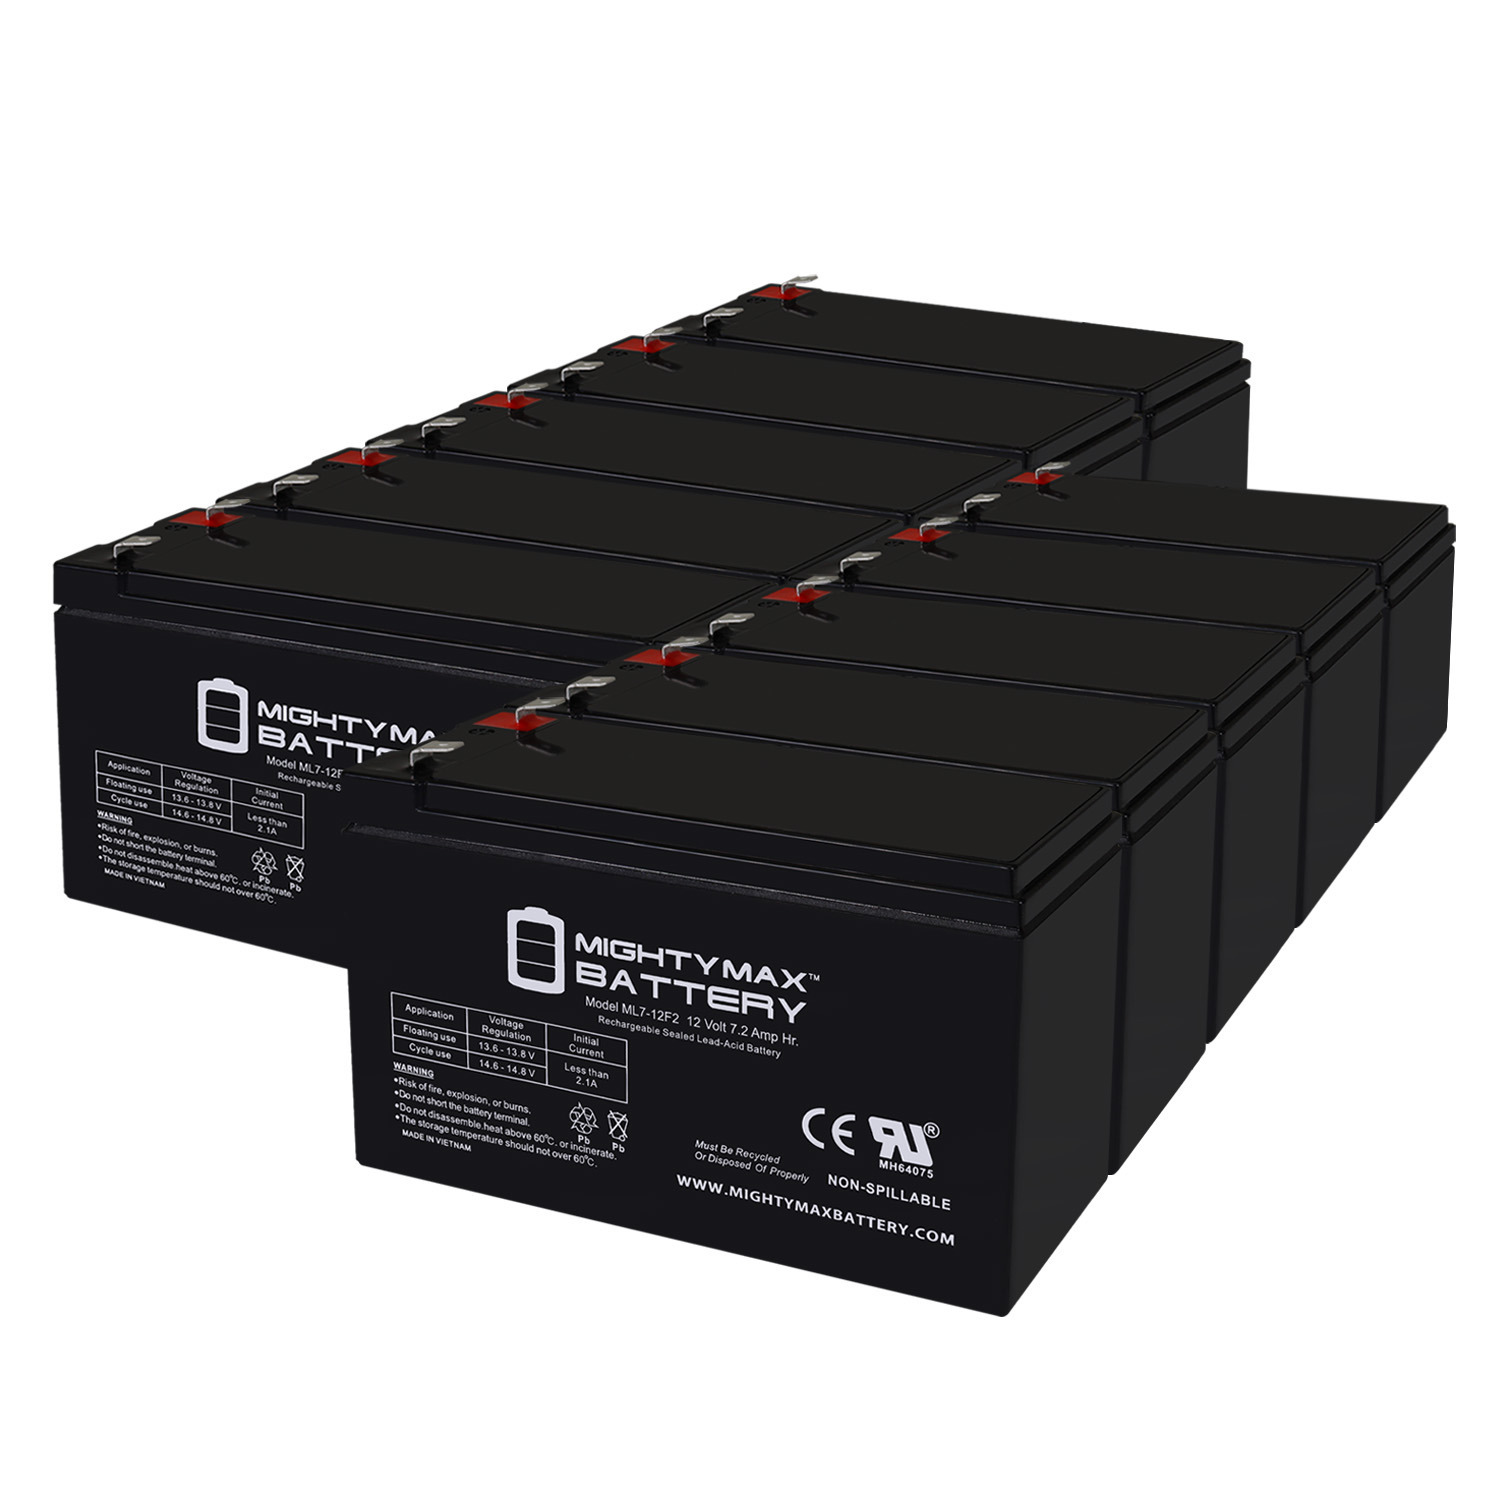 12V 7Ah F2 Replacement Battery for X-treme XB-400 Scooter - 10 Pack